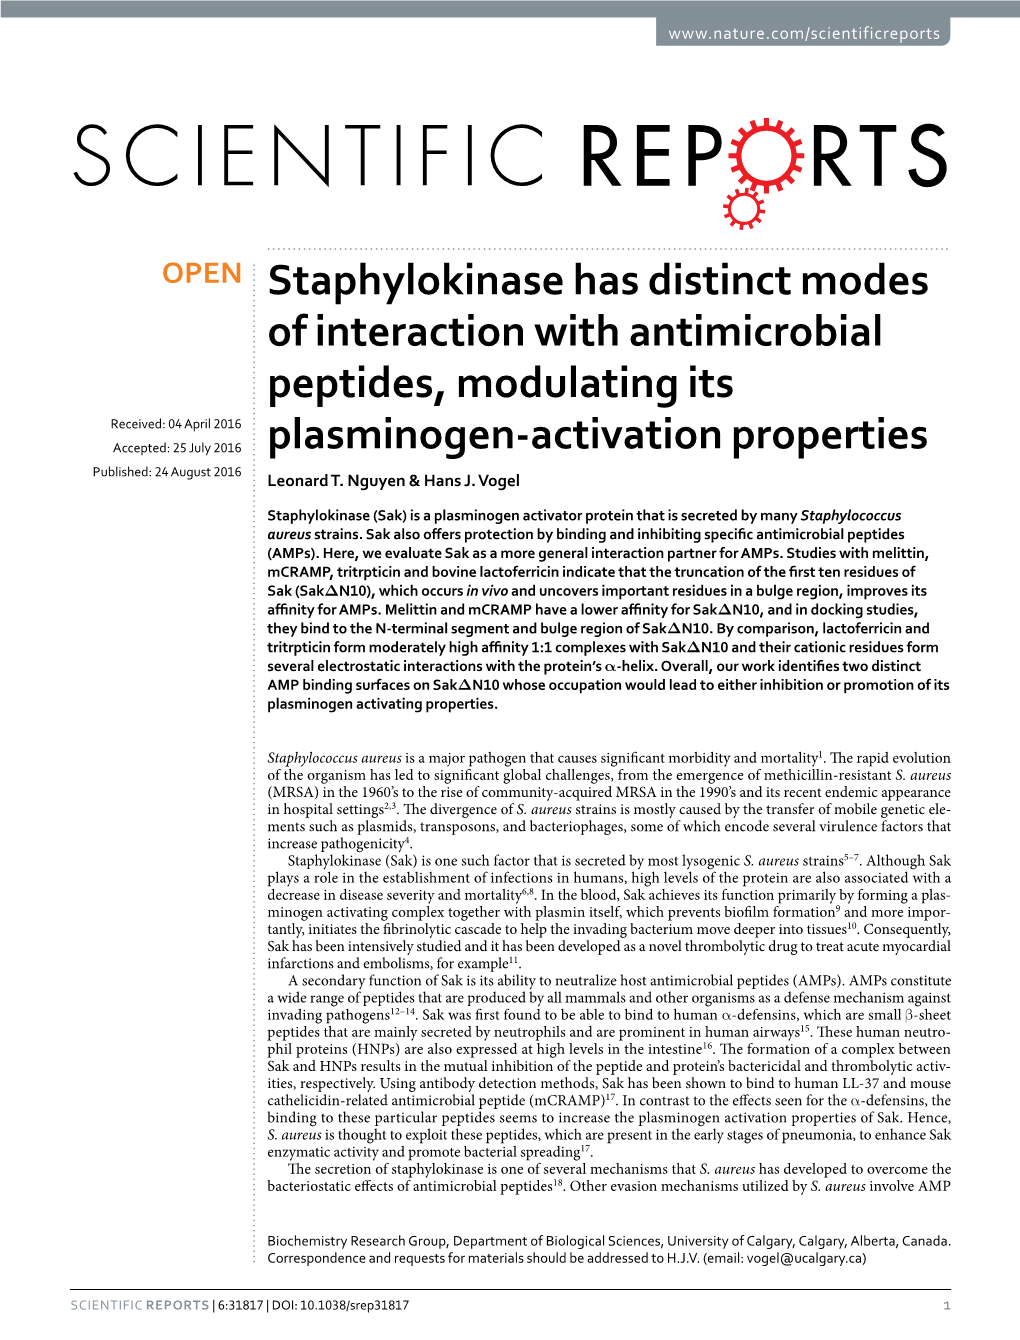 Staphylokinase Has Distinct Modes of Interaction With